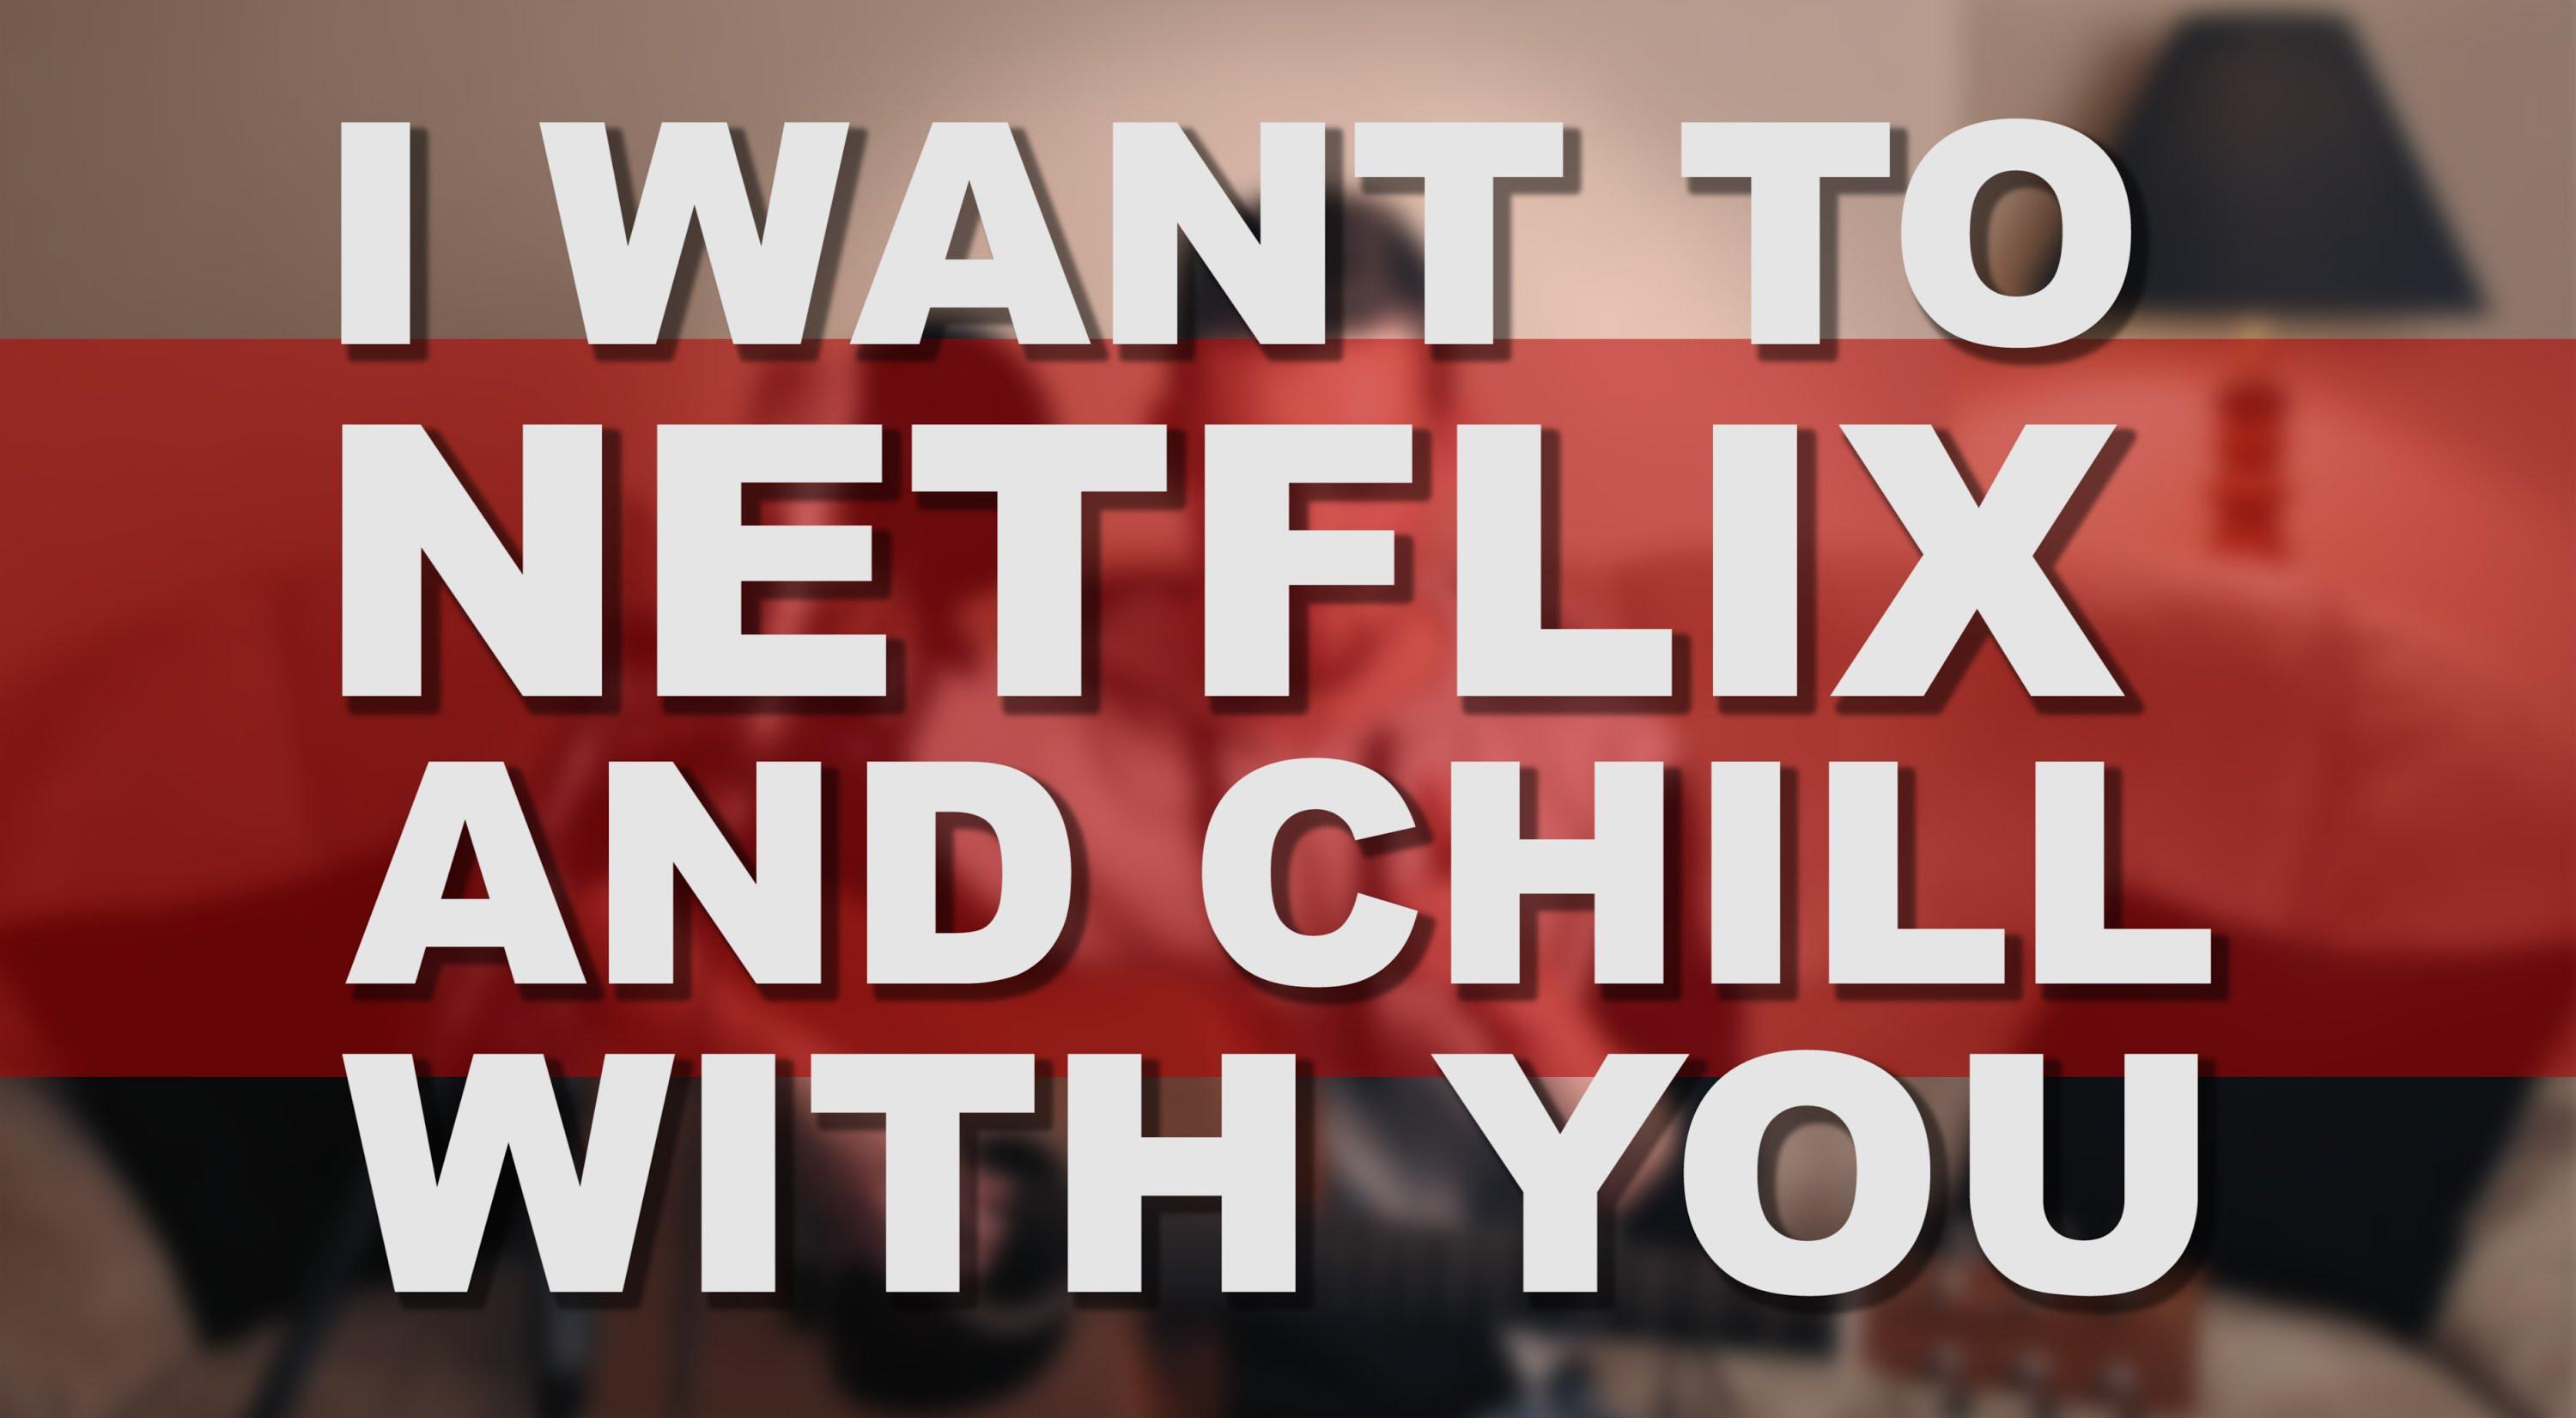 Netflix HD Wallpaper And Chill With You, HD